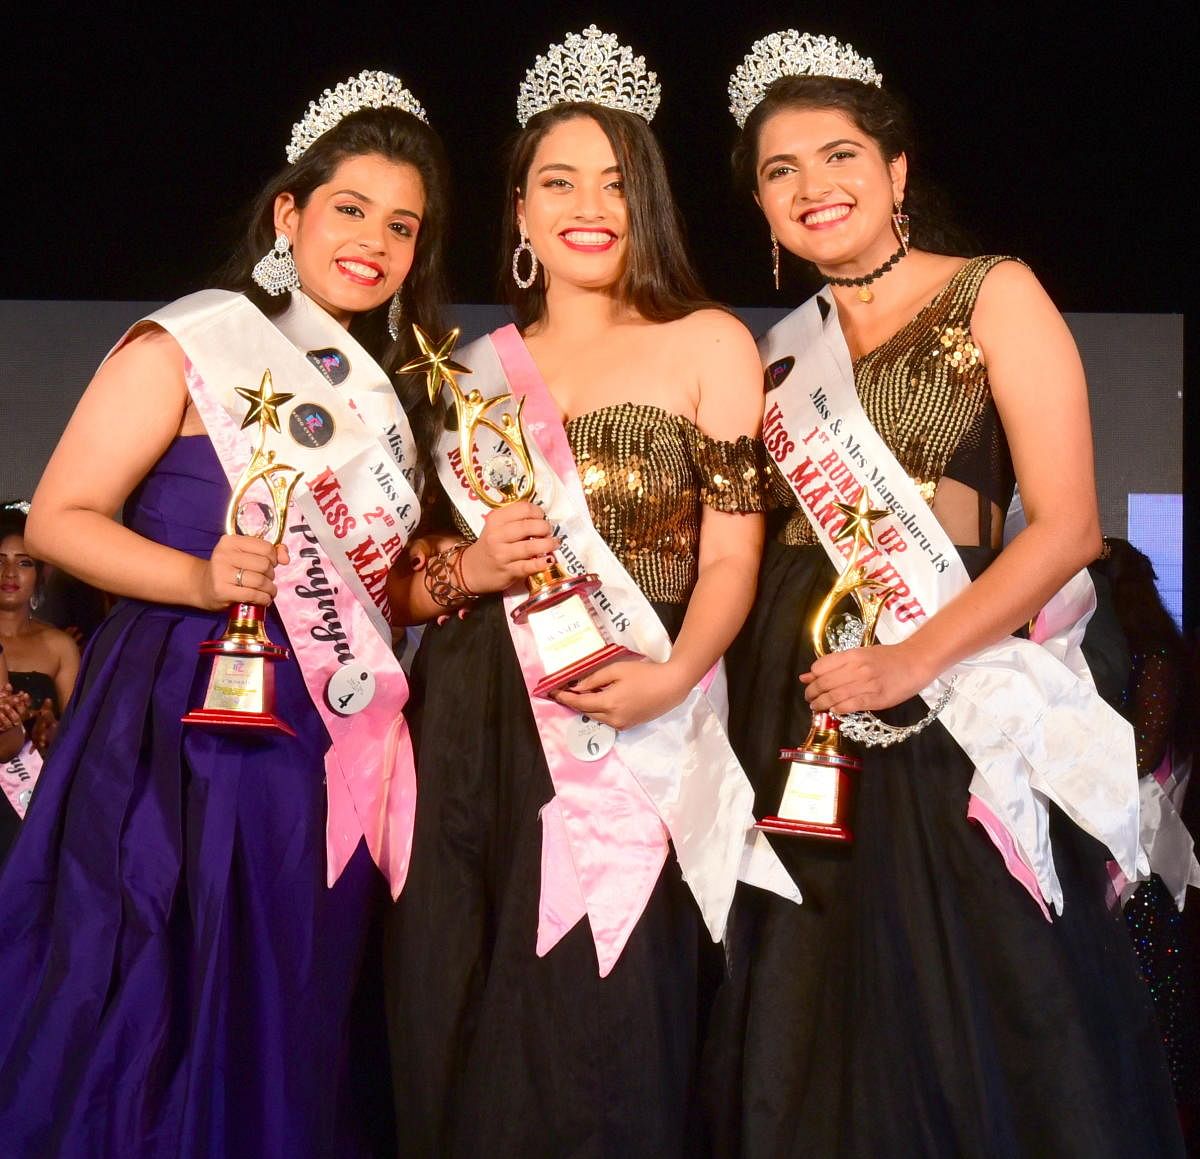 Amanda Lasrado (centre), who was crowned Envigreen Miss Mangaluru 2018, poses with Nishitha Fernandes (right), the first runner-up and Prajnya, the second runner-up in Mangaluru recently.